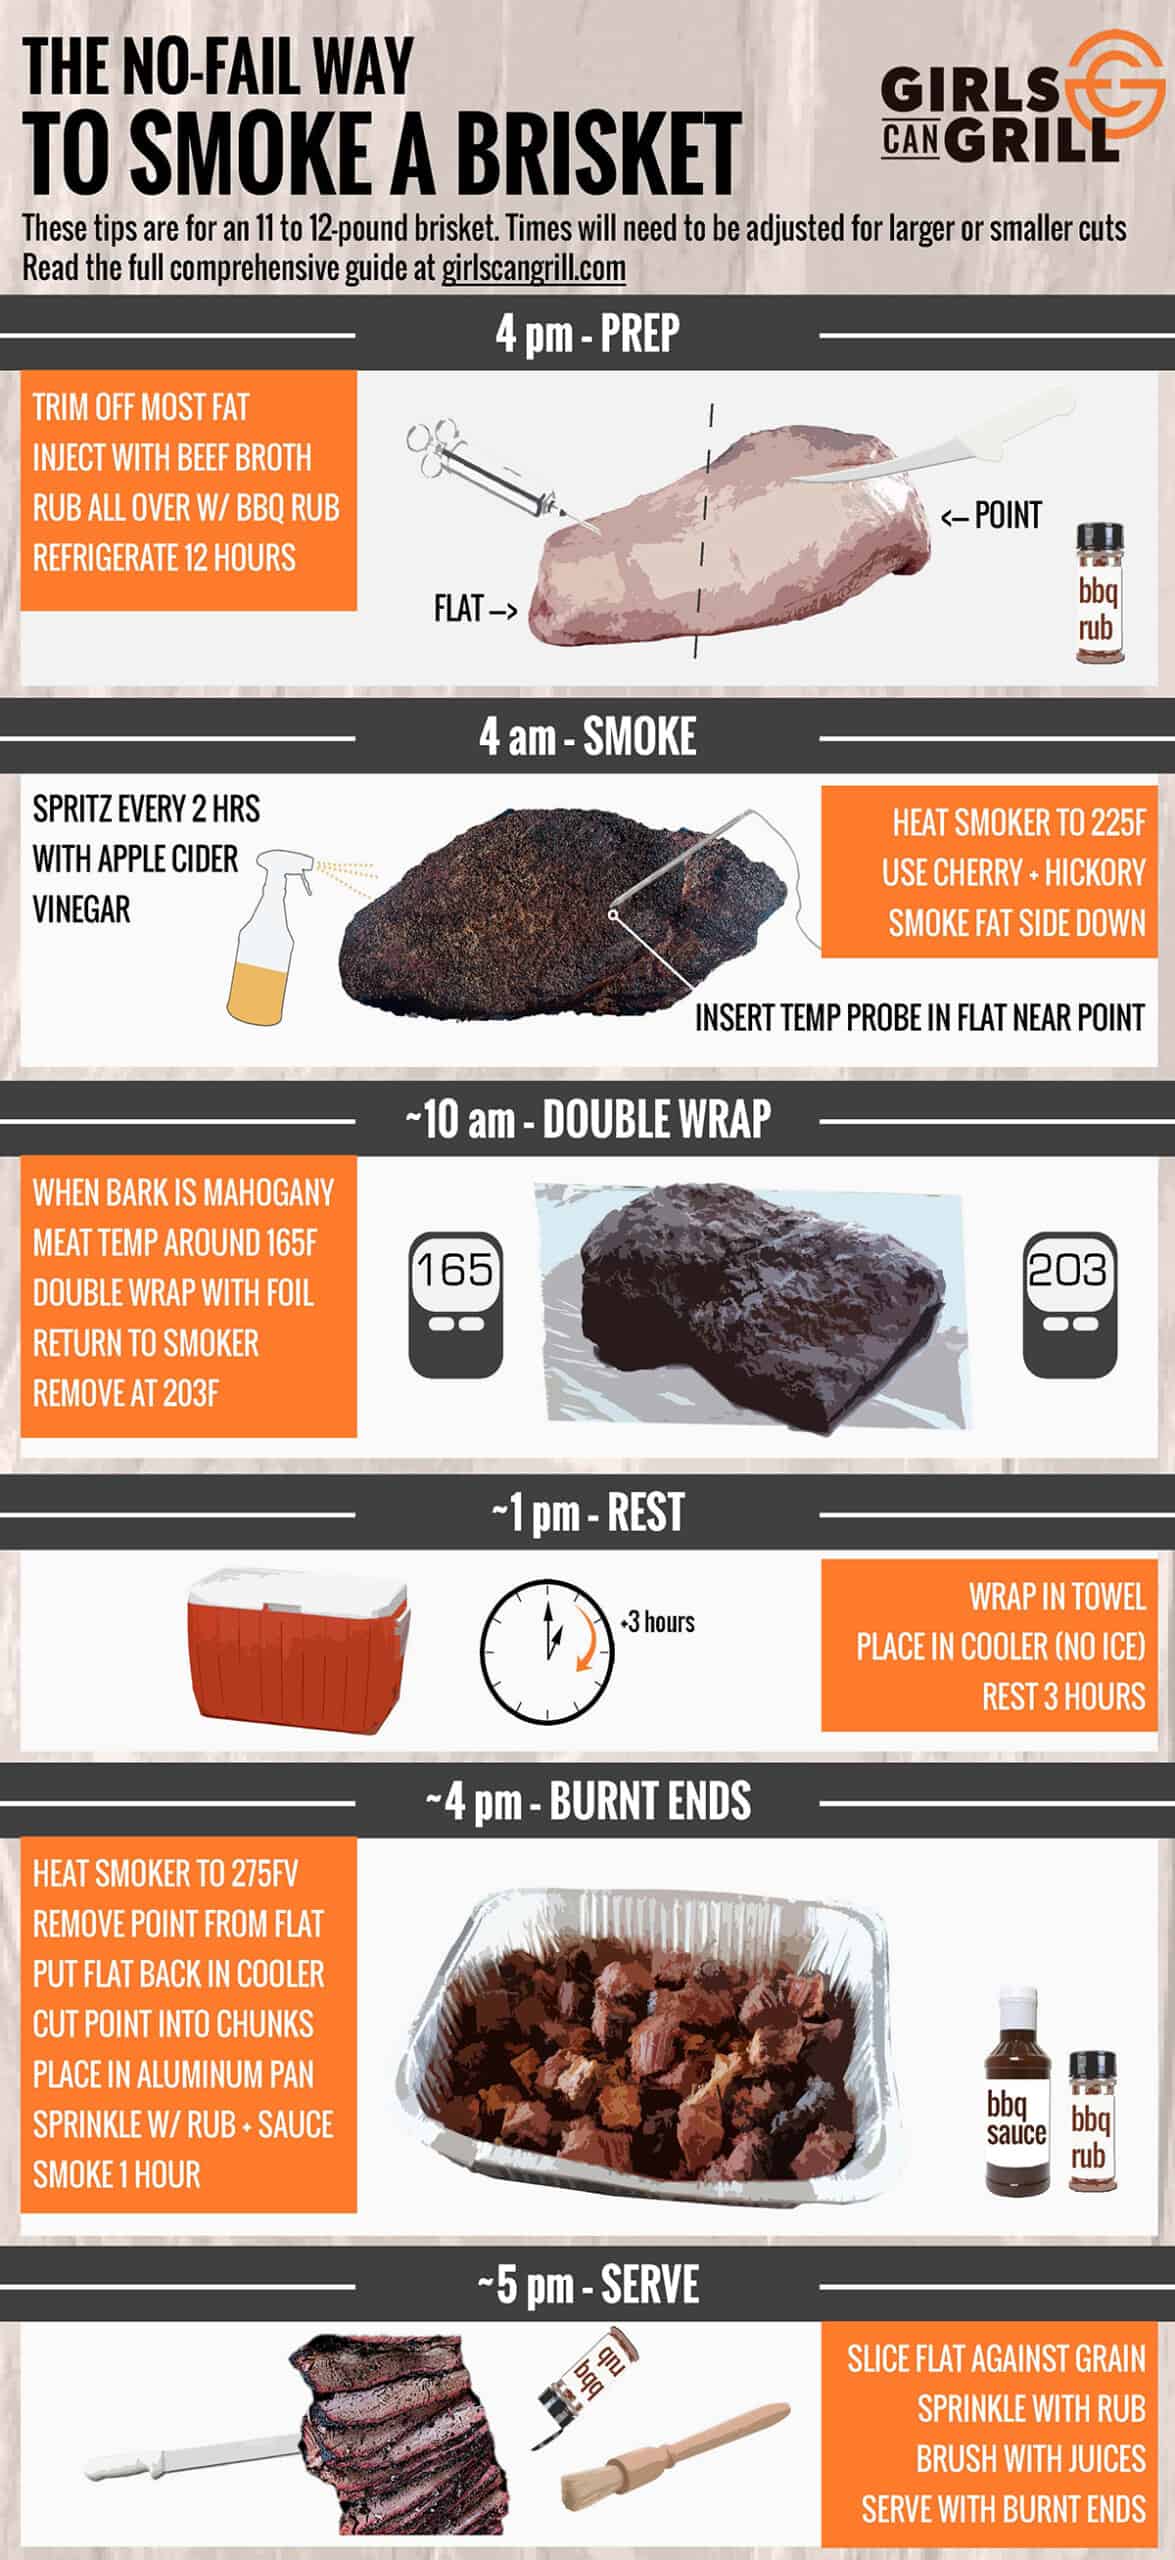 infographic showing steps to make no-fail smoked brisket.